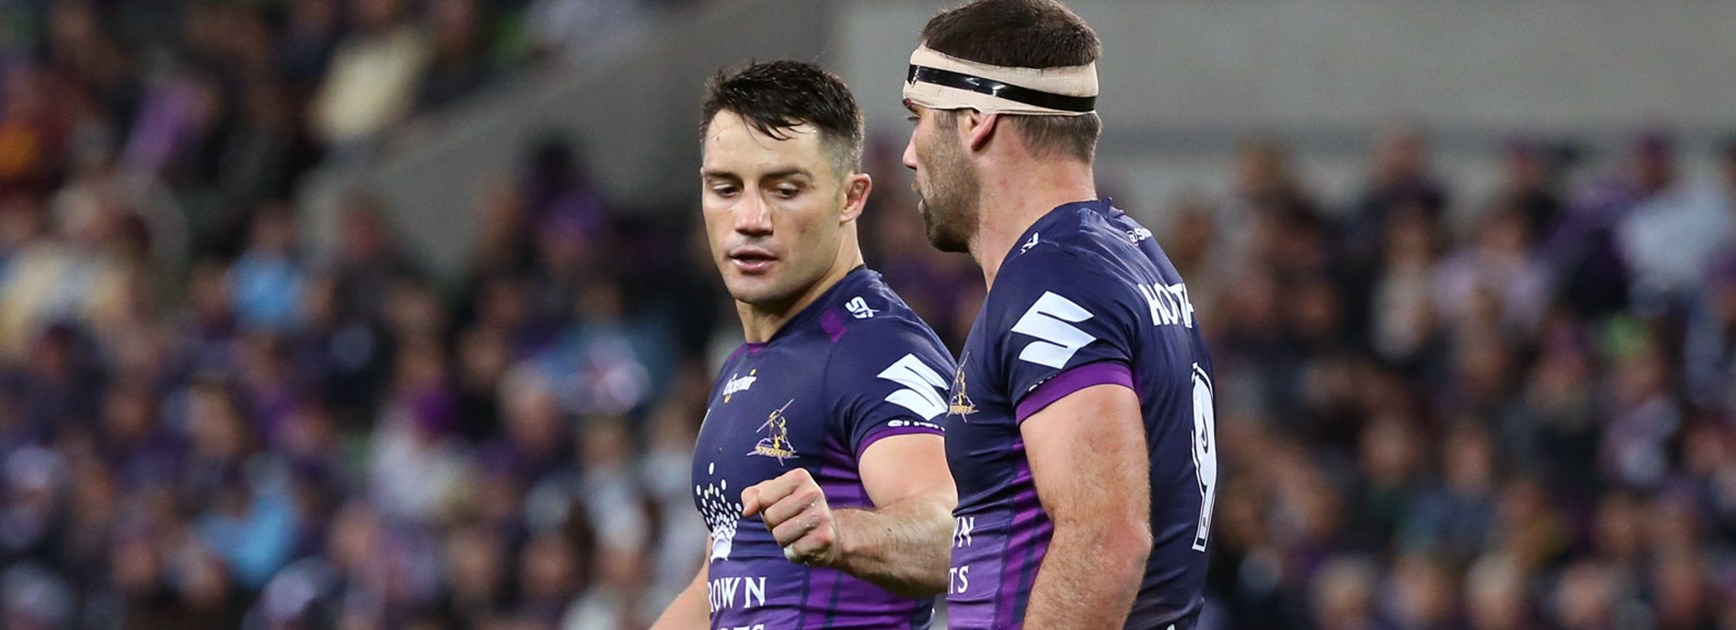 Storm halfback Cooper Cronk will make his 300th NRL appearance in his side's home preliminary final.